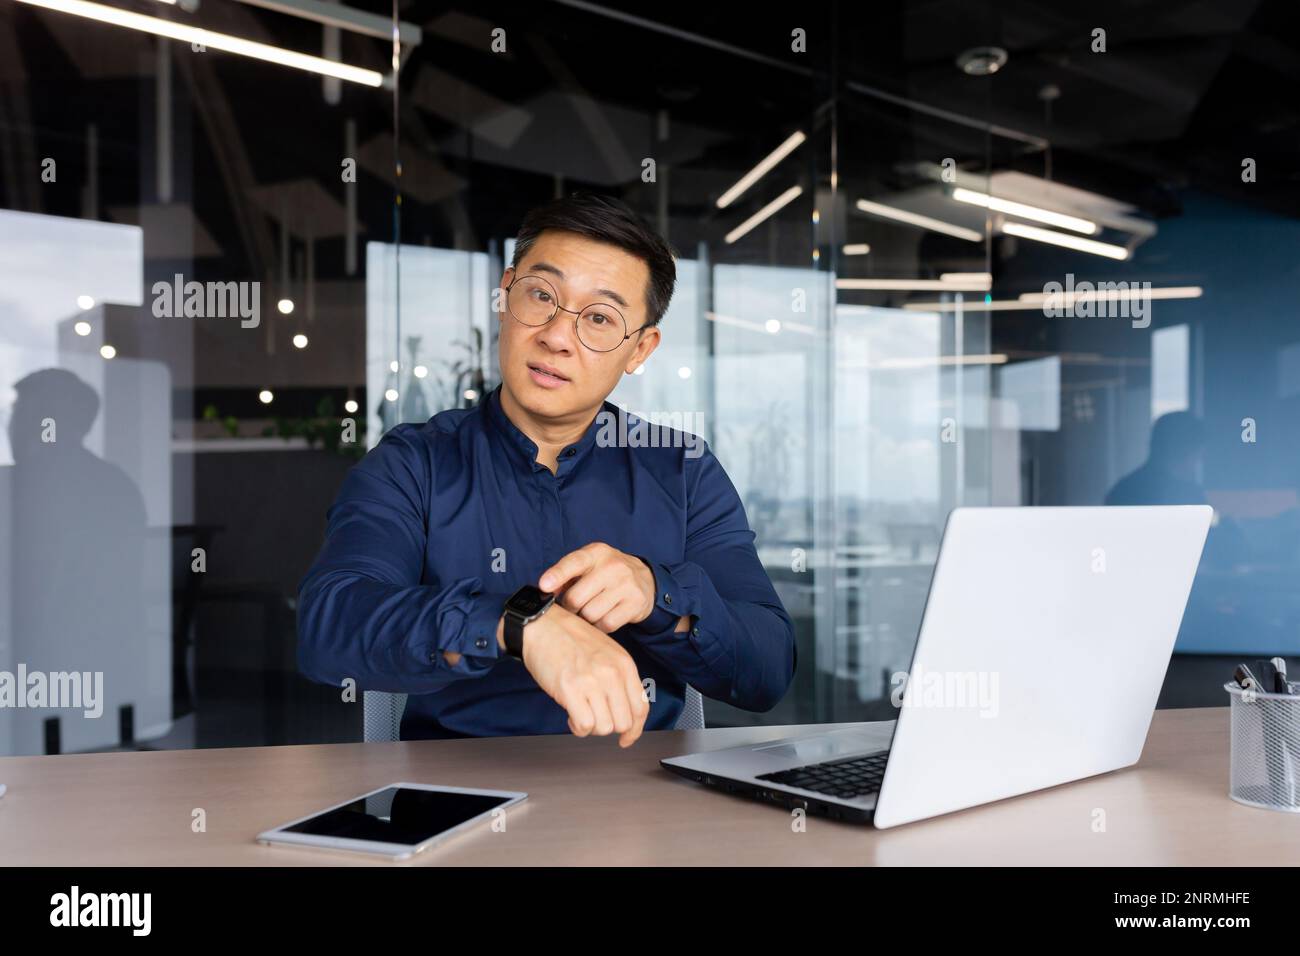 Man at work with laptop inside office, businessman unhappy and serious showing watch to camera, being late for colleague's meeting. Stock Photo